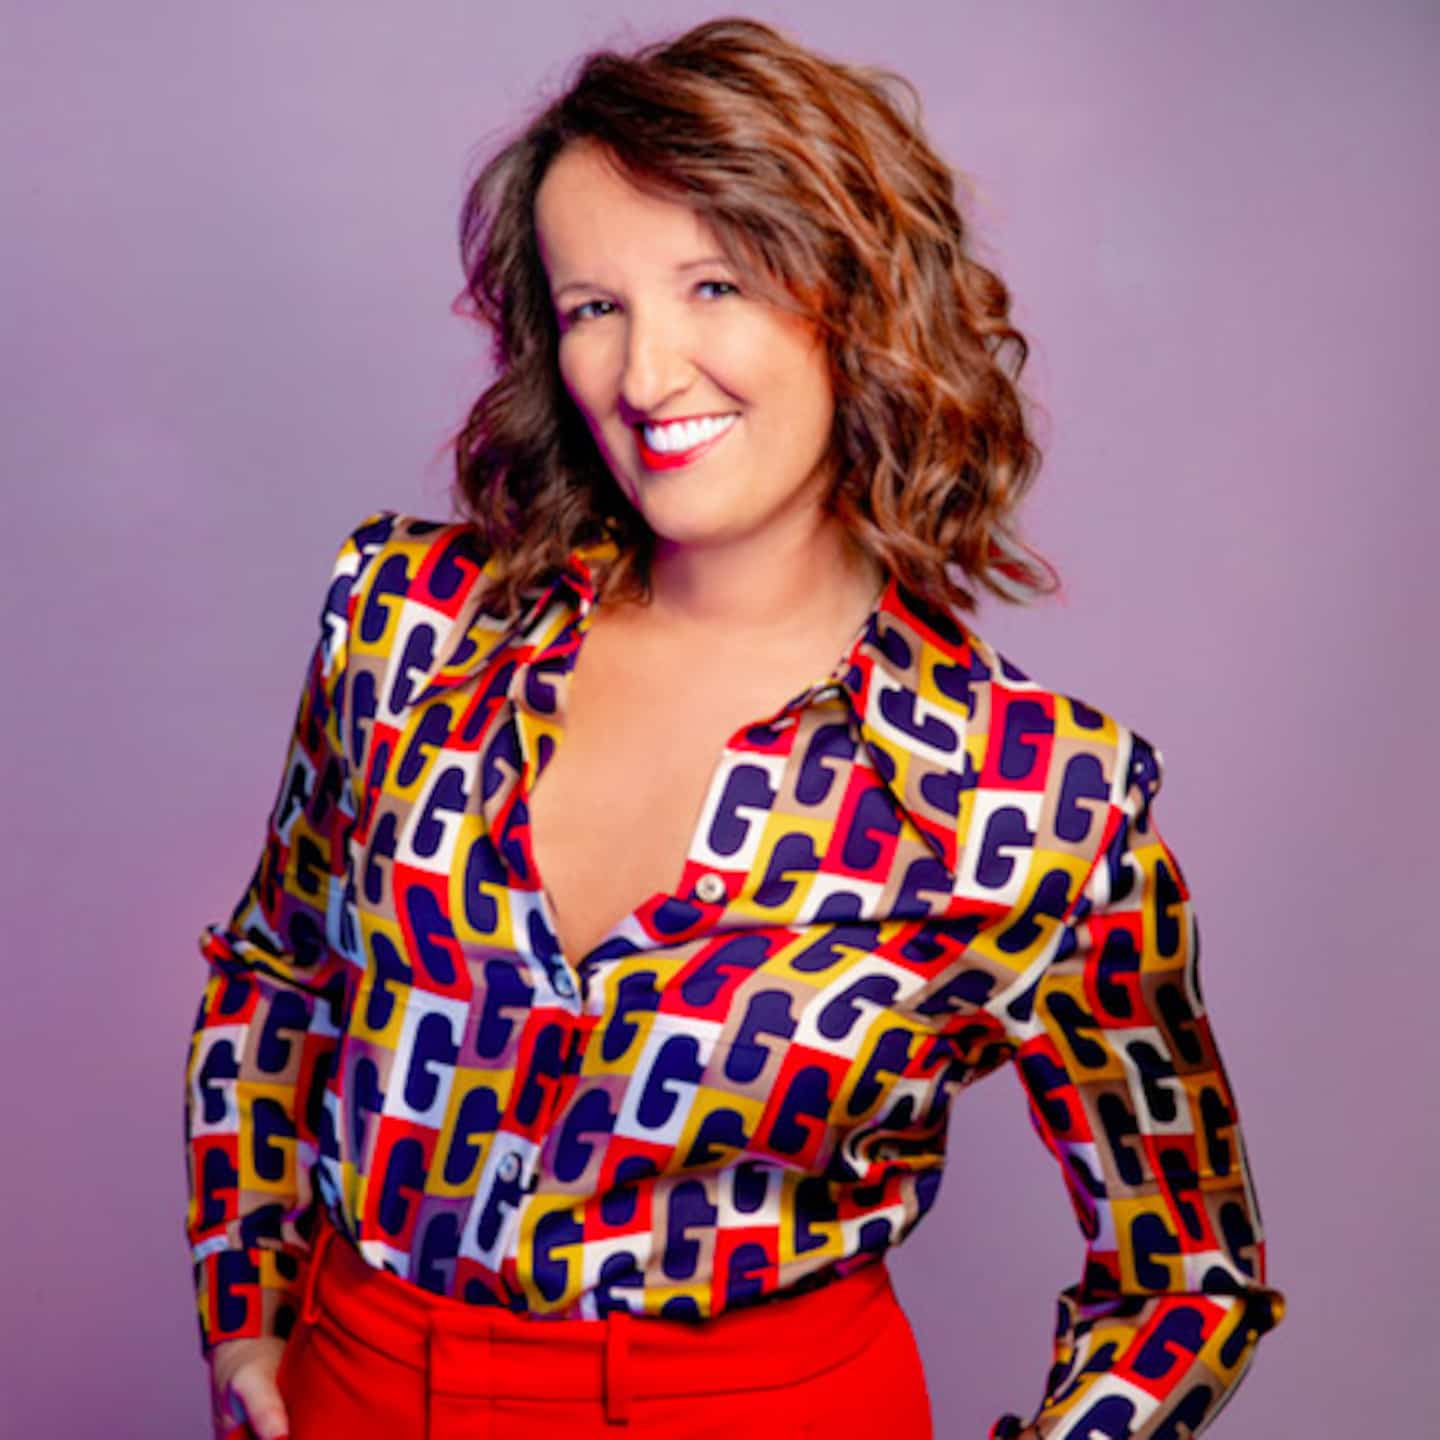 Anne Roumanoff with her new show at ComediHa! Fest-Quebec